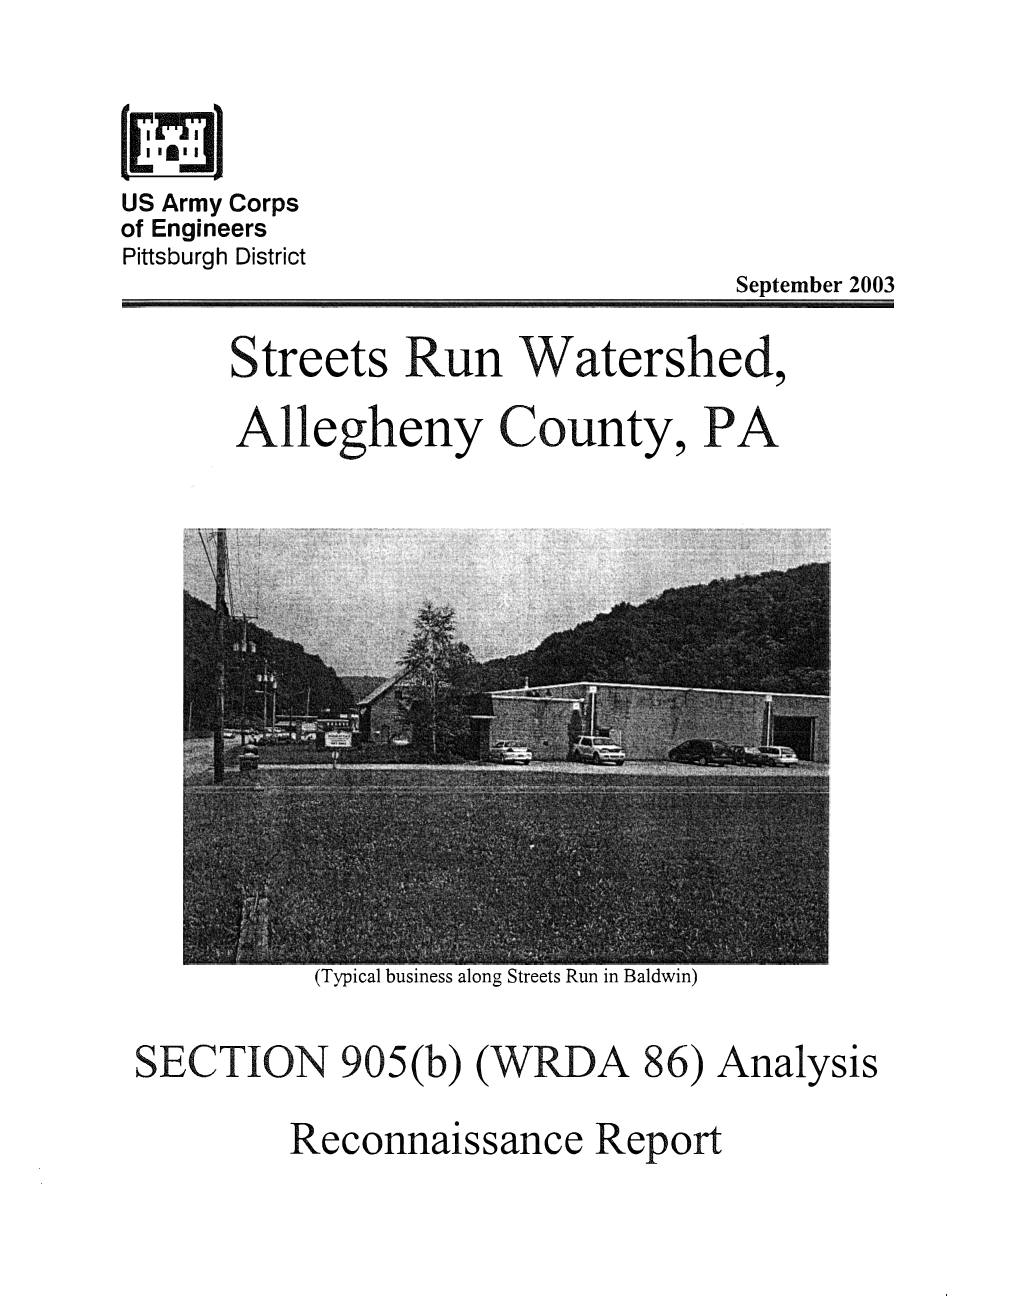 Streets Run Watershed Section 905(B)